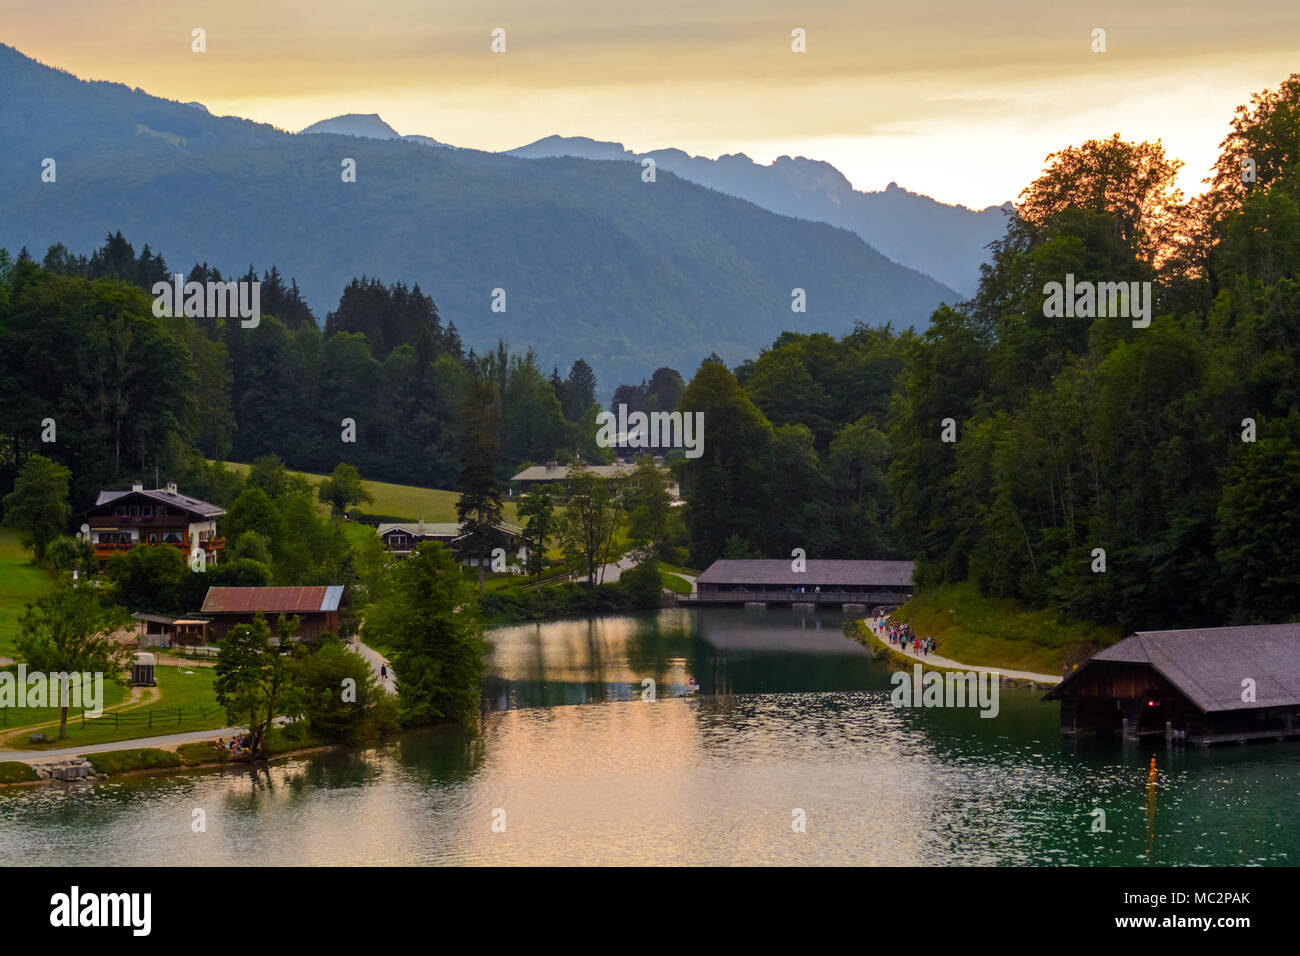 Mountain lake shore and country houses at dusk Stock Photo